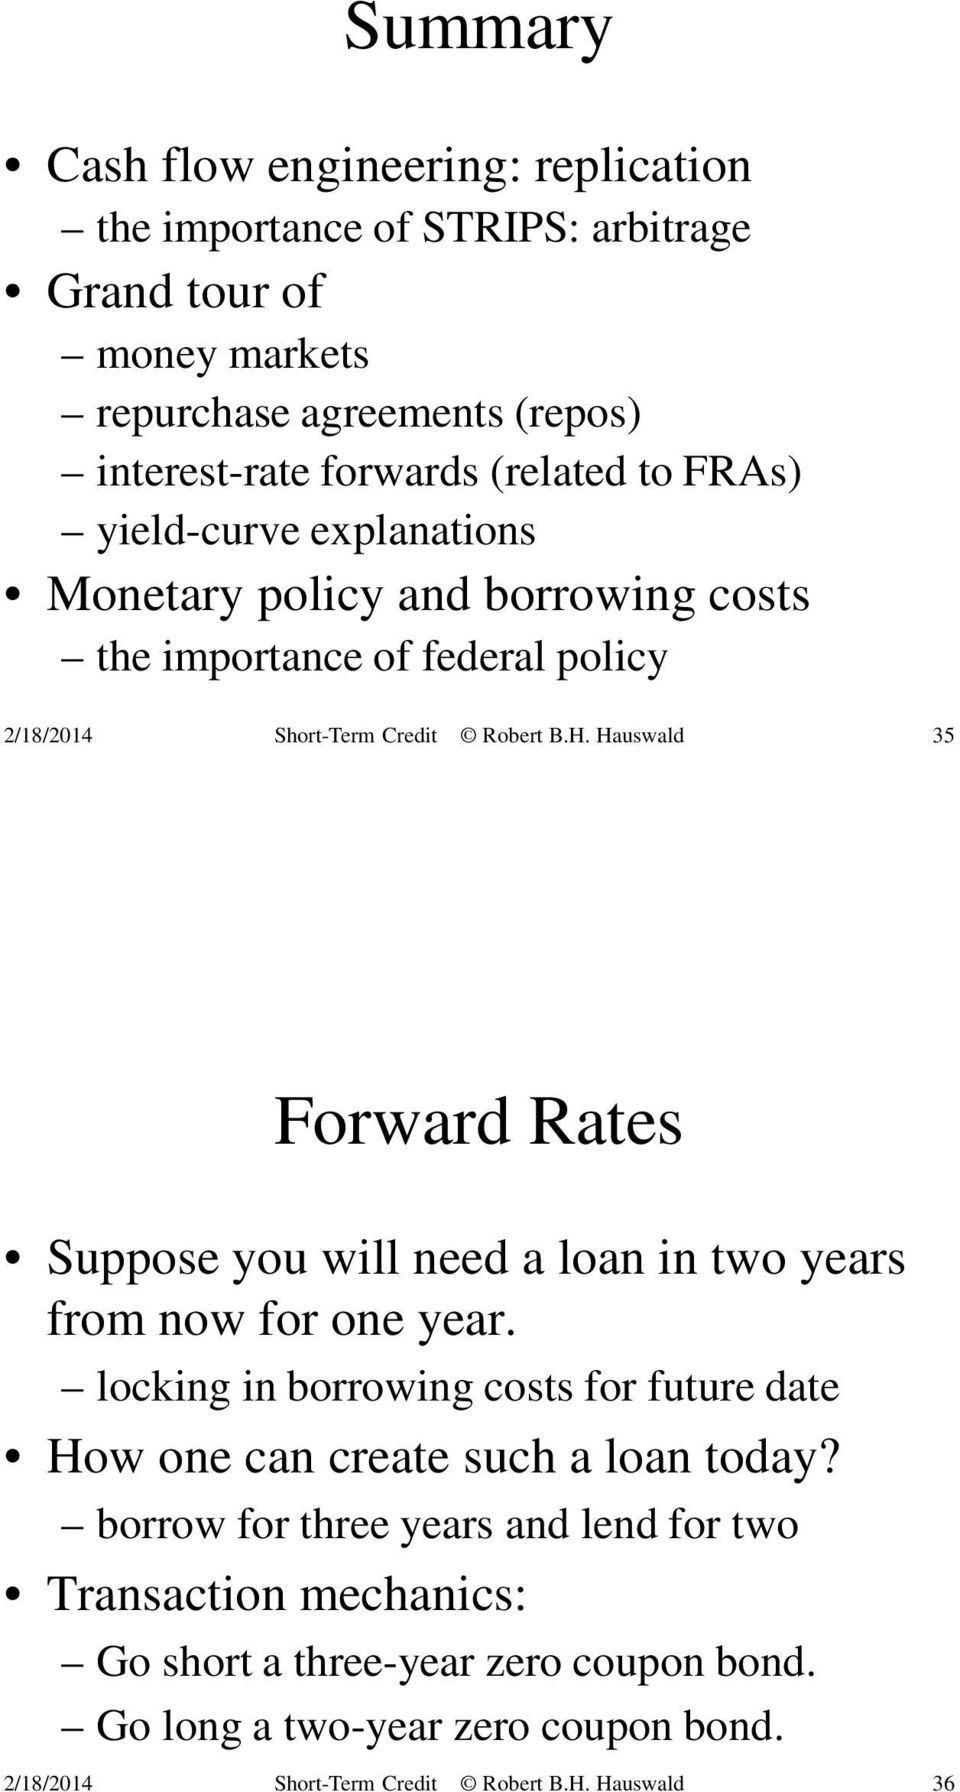 Hauswald 35 Forward Rates Suppose you will need a loan in two years from now for one year.